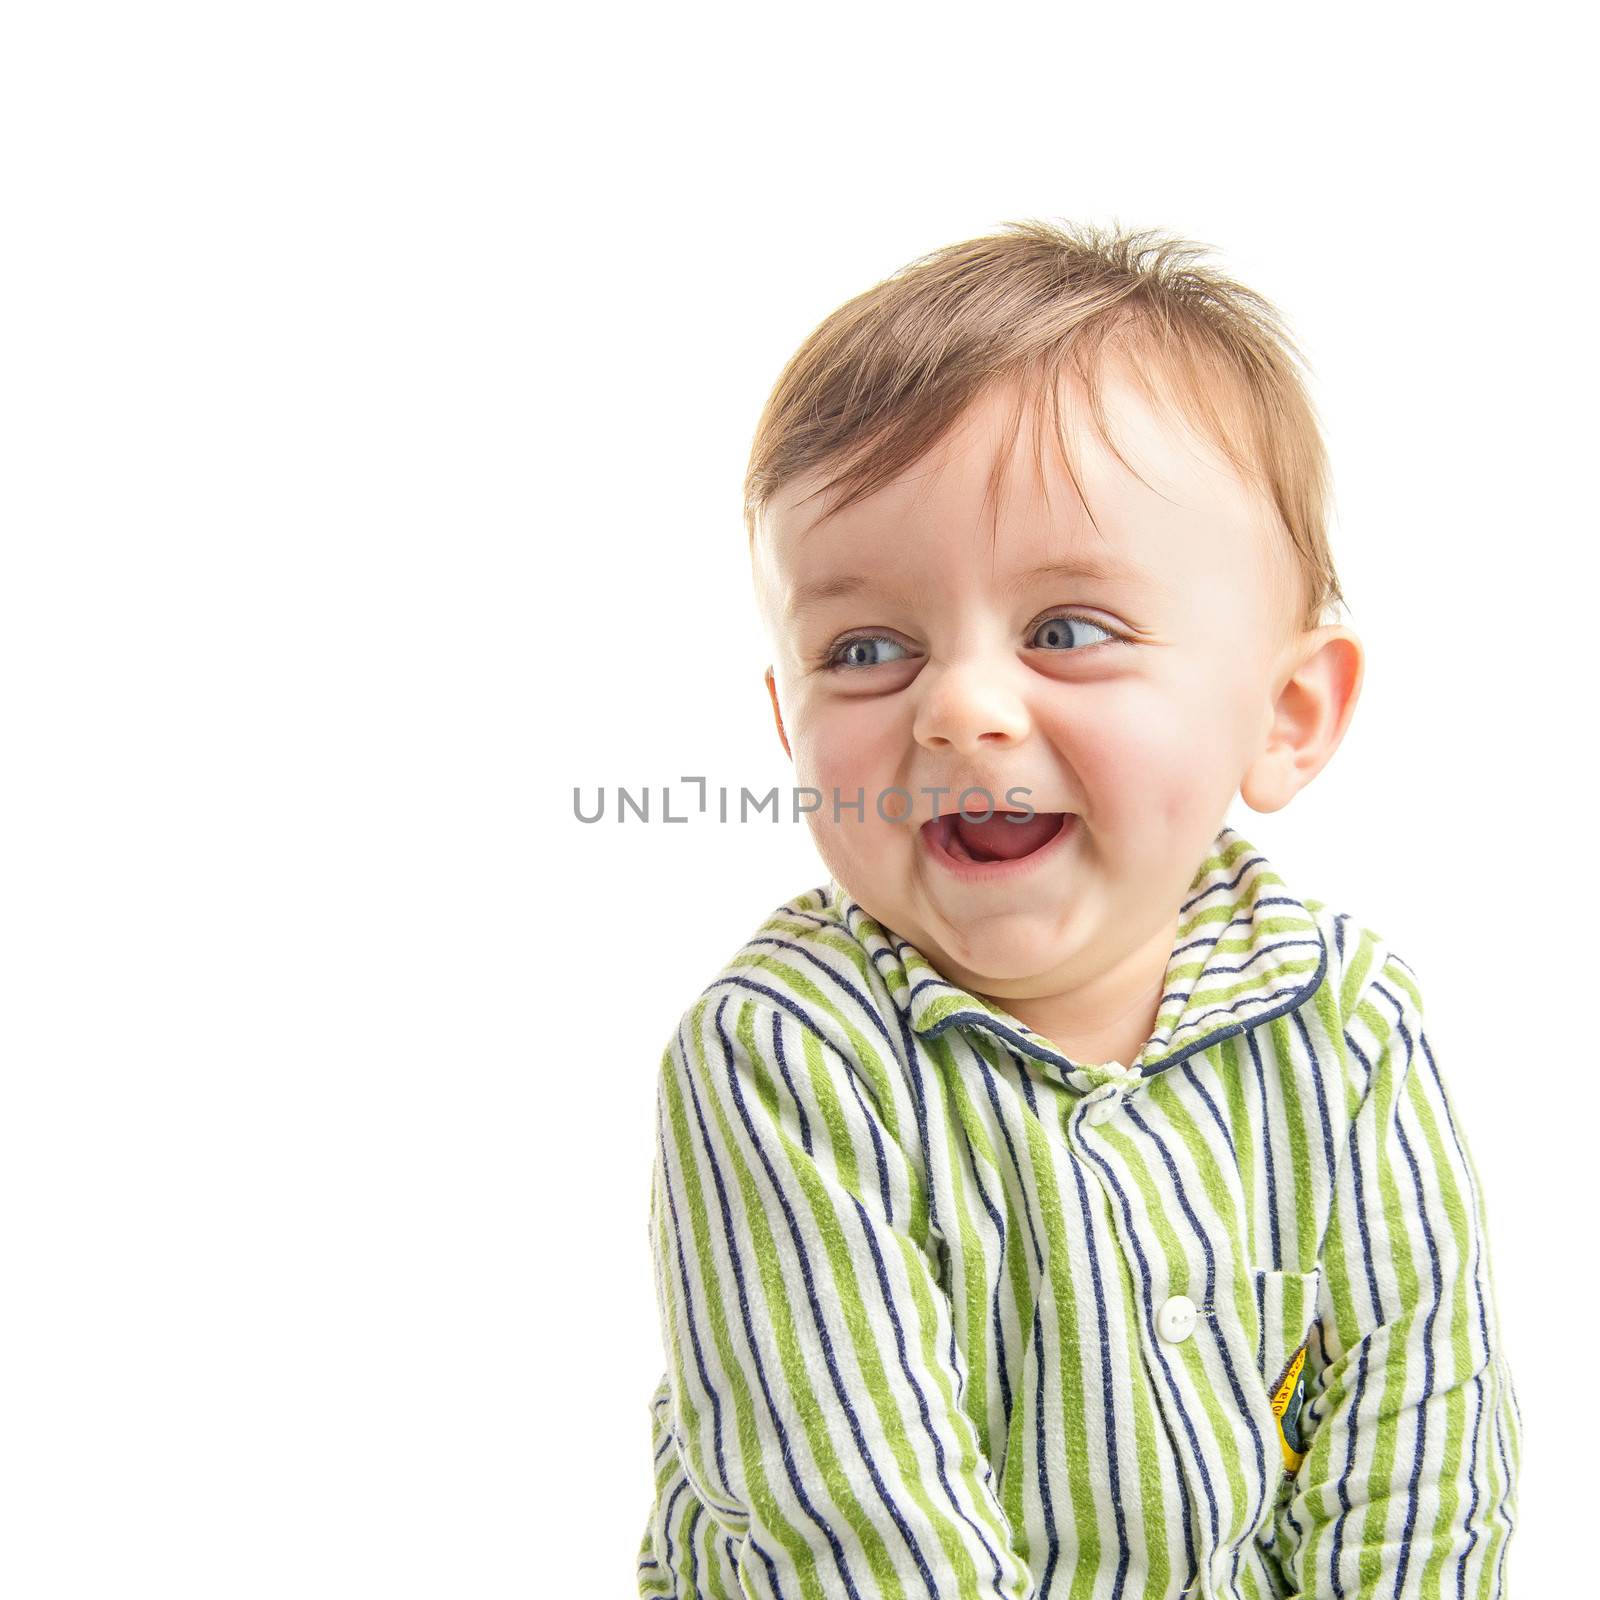 Laughing baby by dynamicfoto